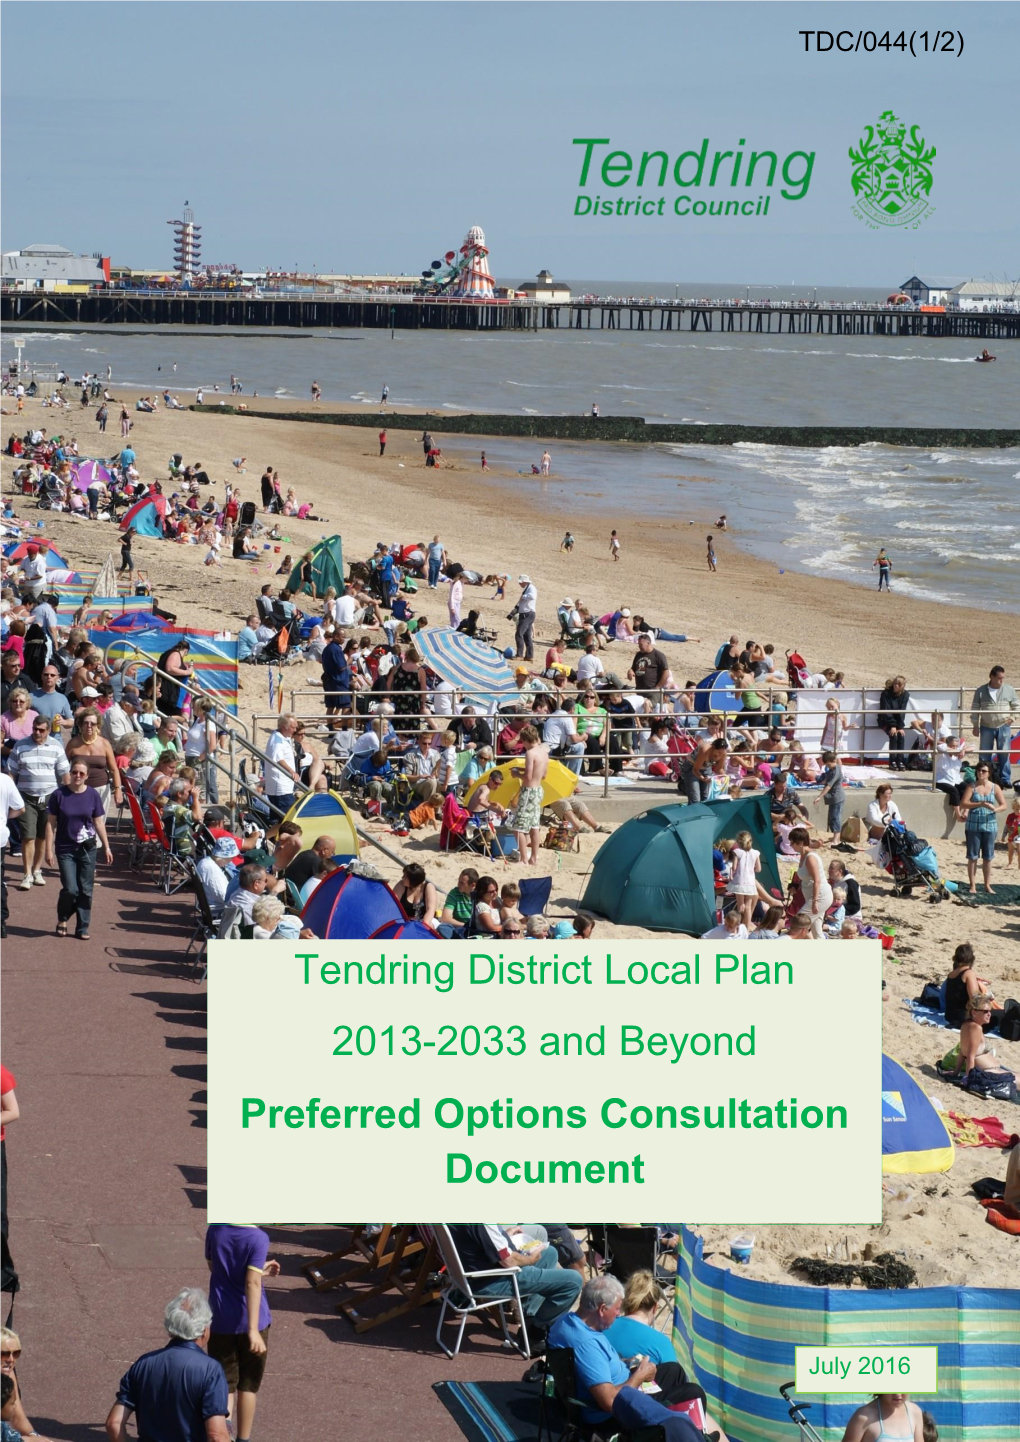 Tendring District Local Plan 2013-2033 and Beyond Preferred Options Consultation Document